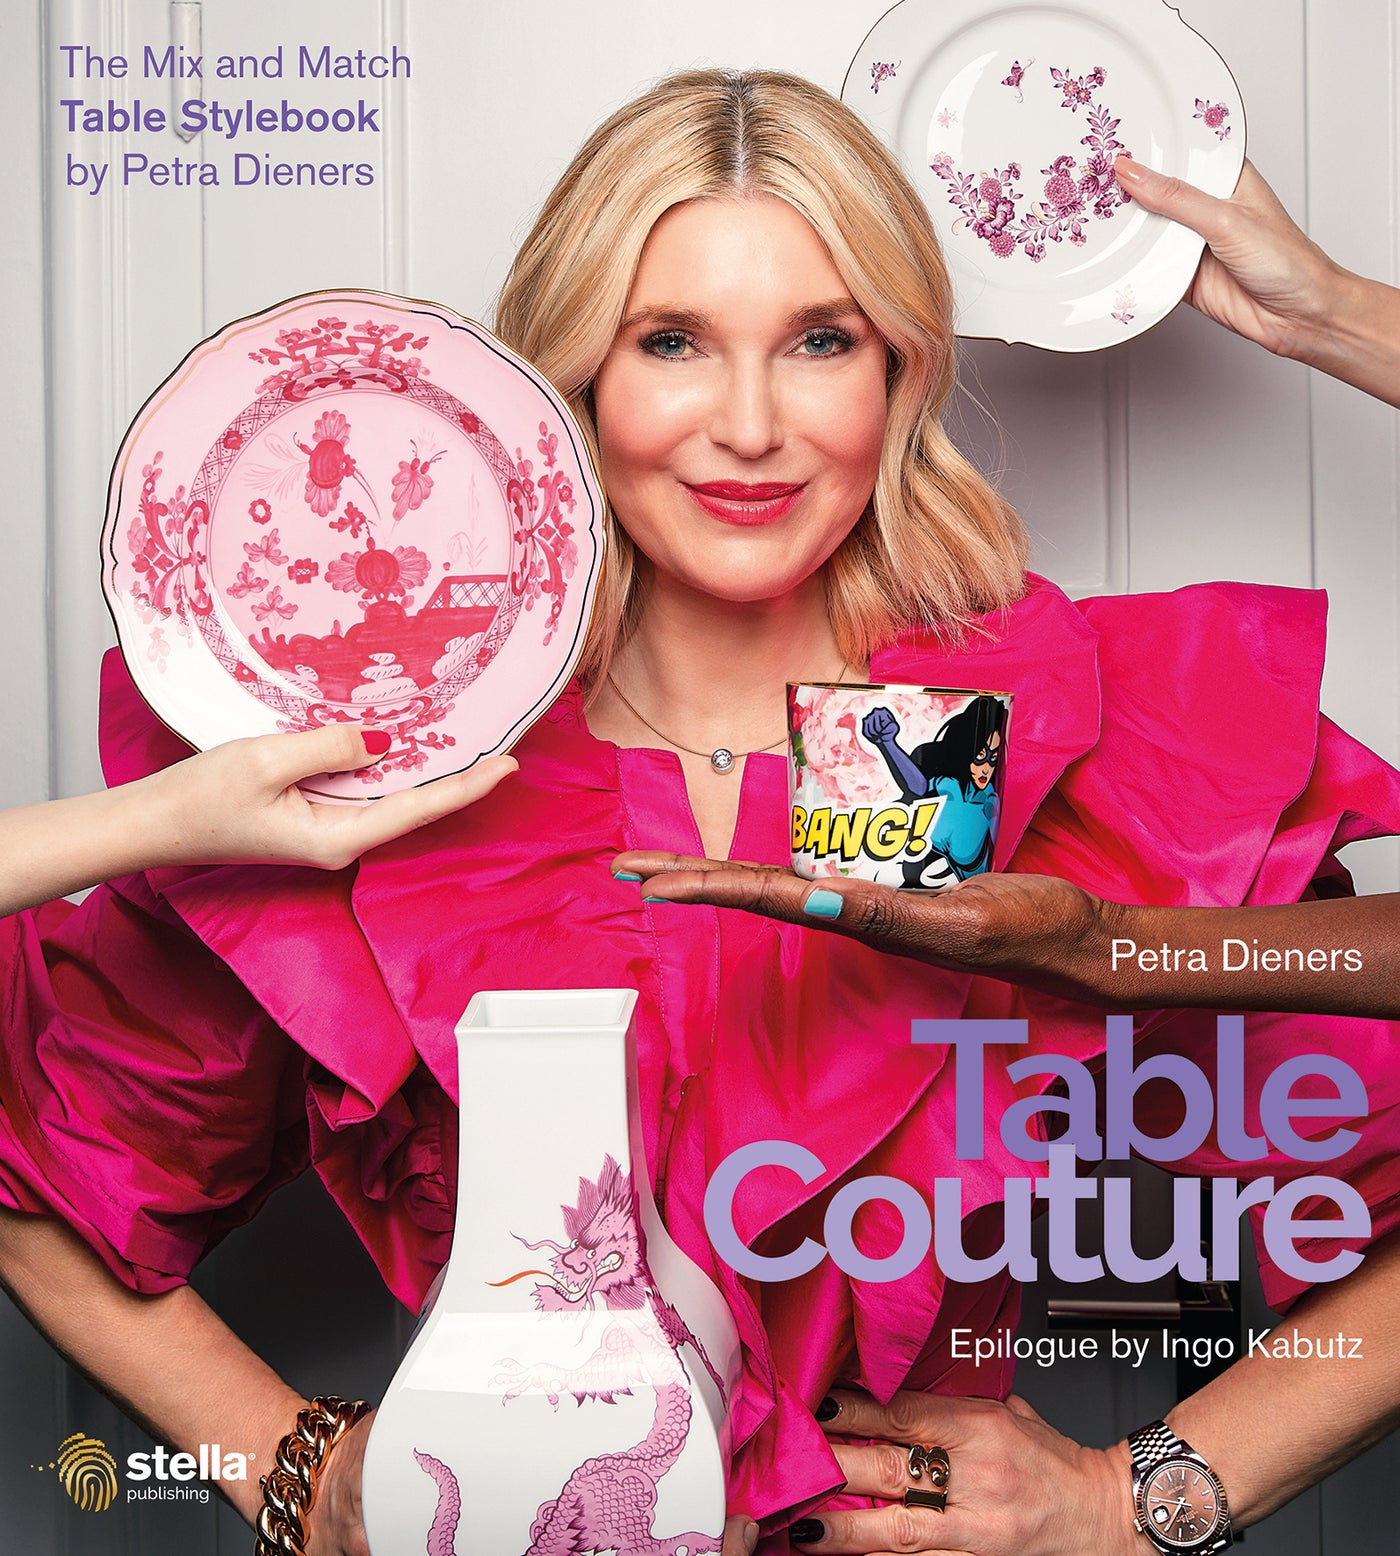 ADVANCE SALE: TABLE COUTURE The Mix and Match Table Stylebook by Petra Dieners